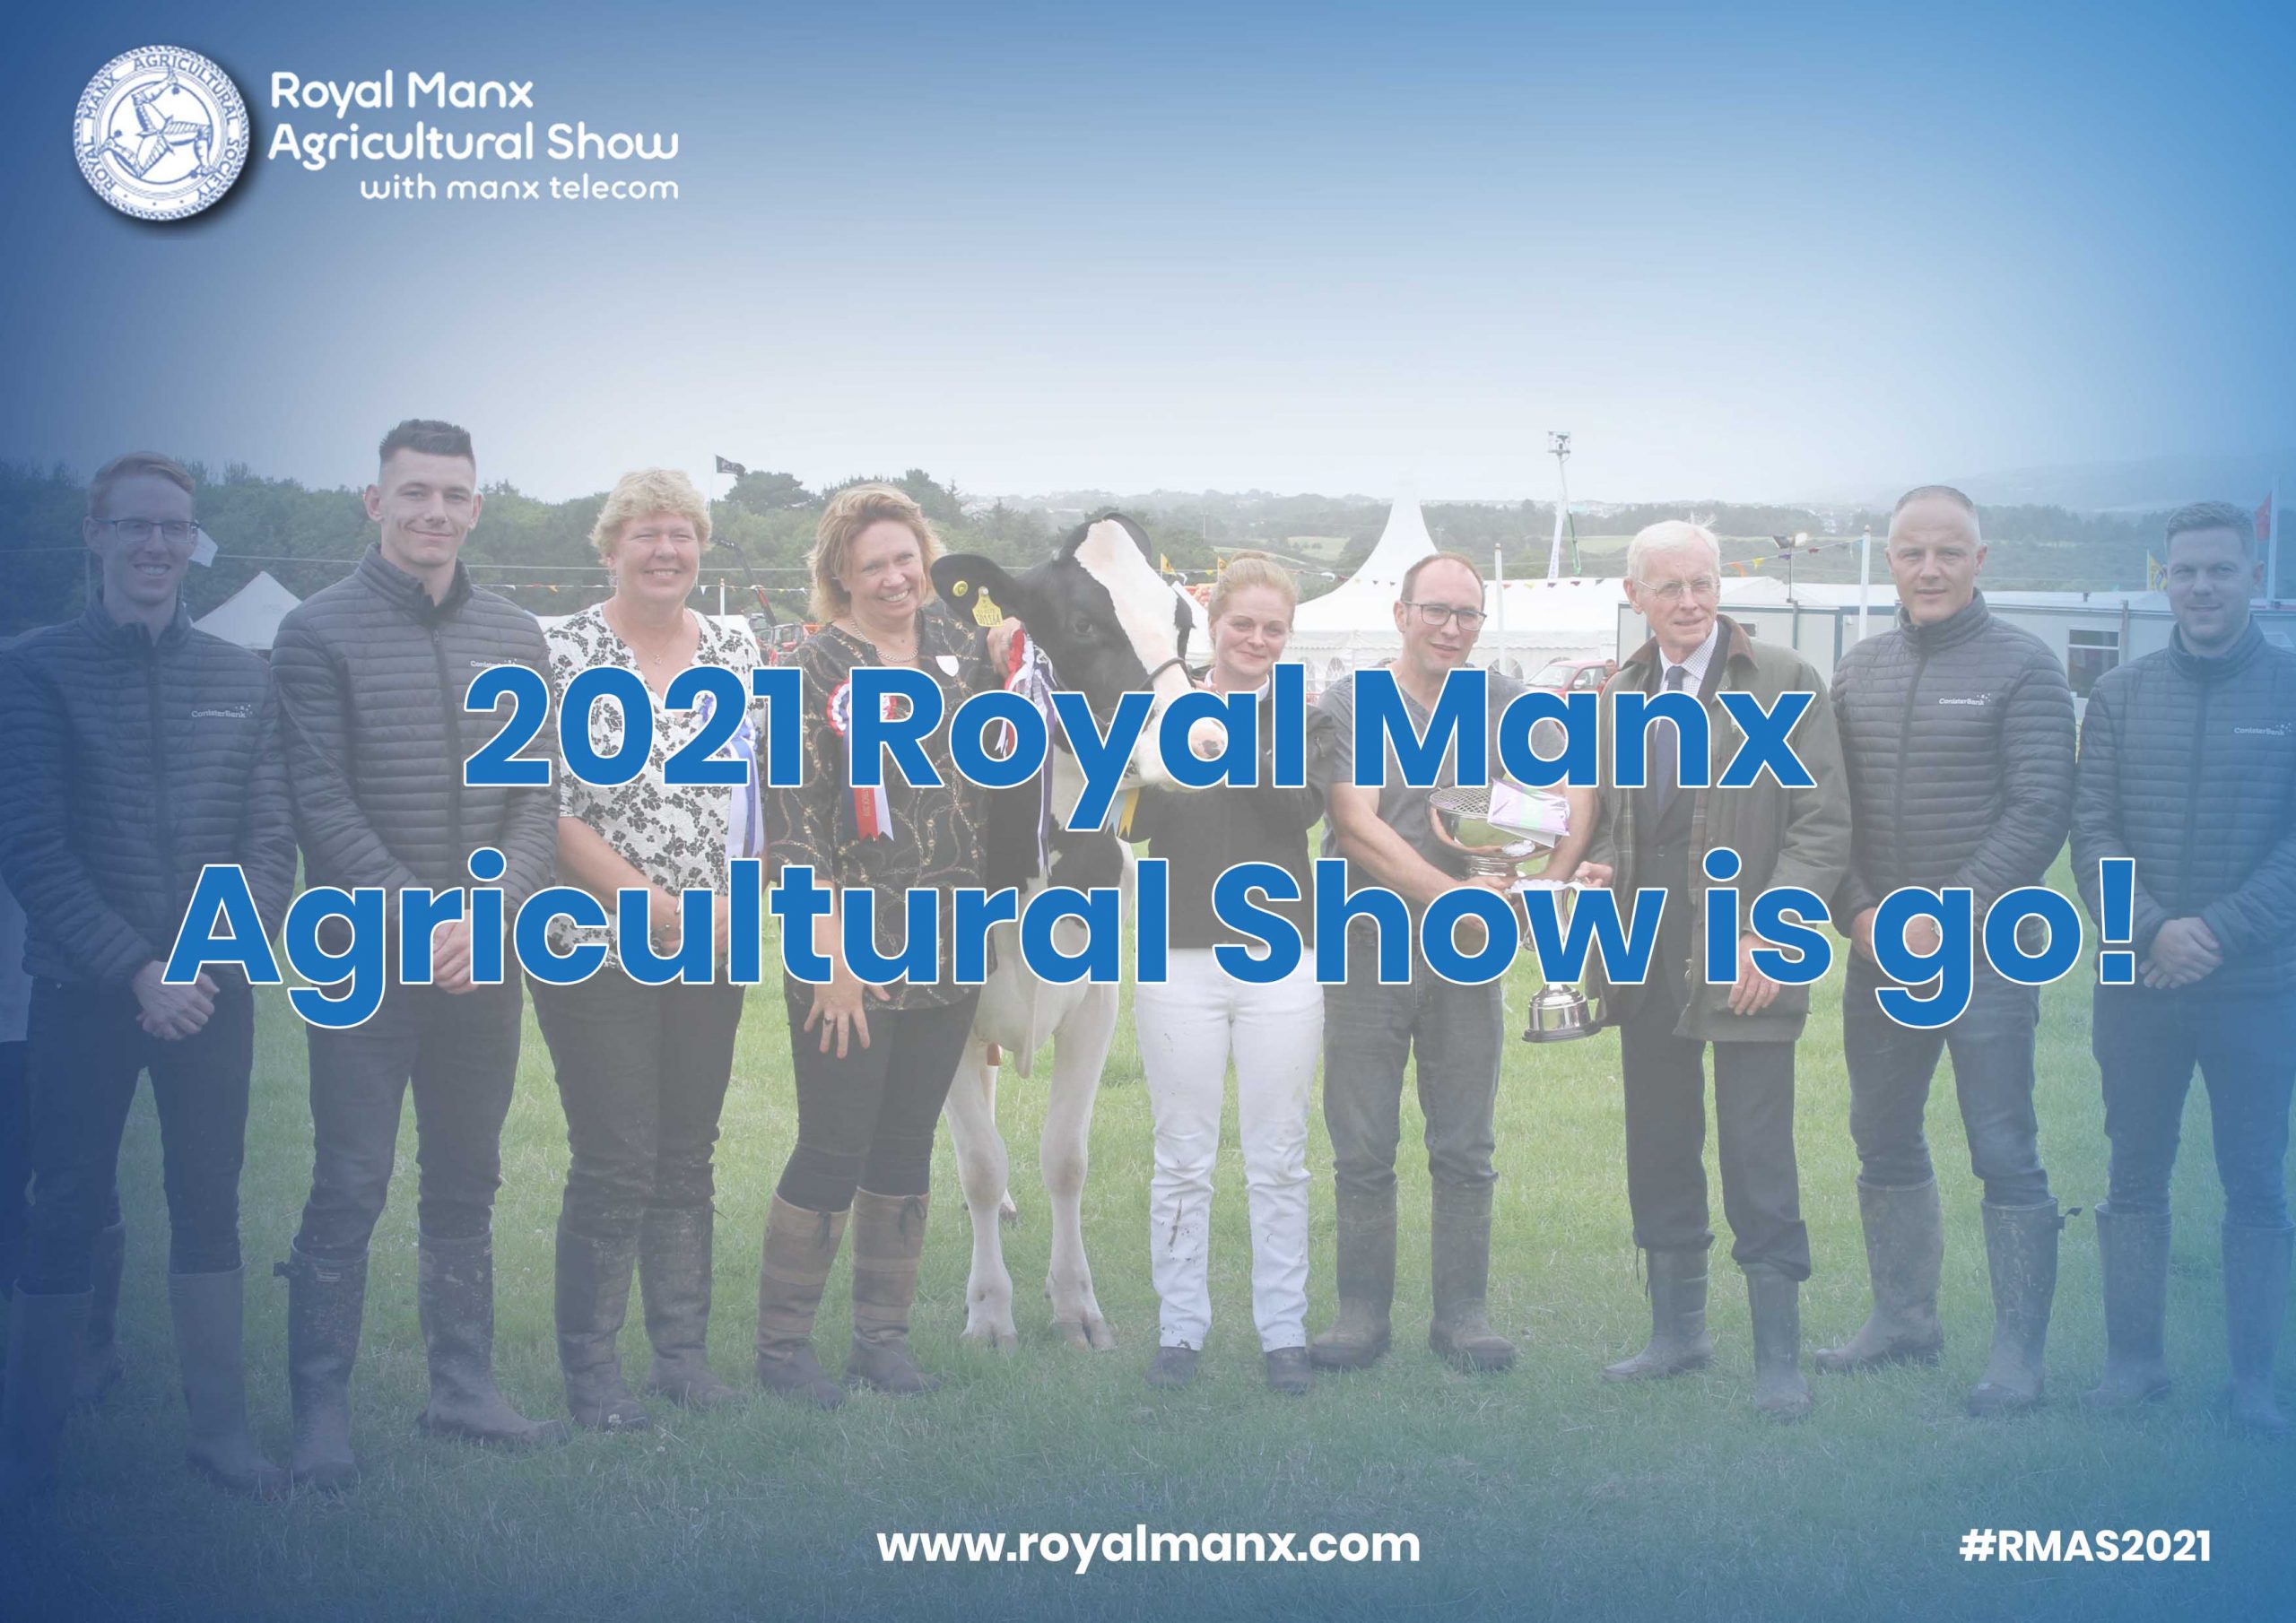 2021 Royal Manx Agricultural Show is go!